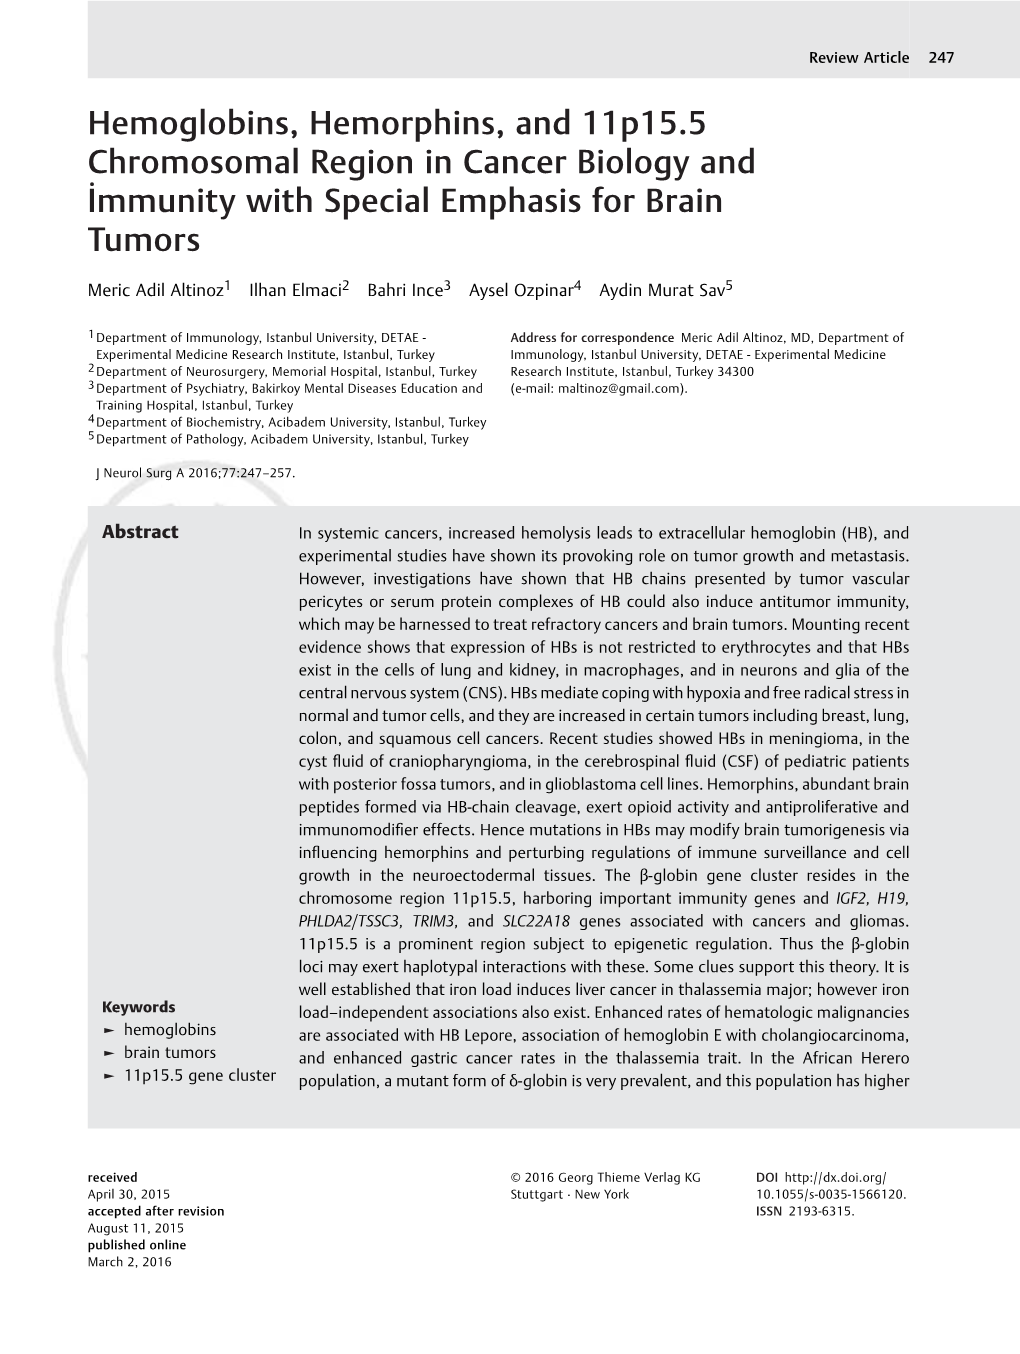 Hemoglobins, Hemorphins, and 11P15.5 Chromosomal Region in Cancer Biology and İmmunity with Special Emphasis for Brain Tumors